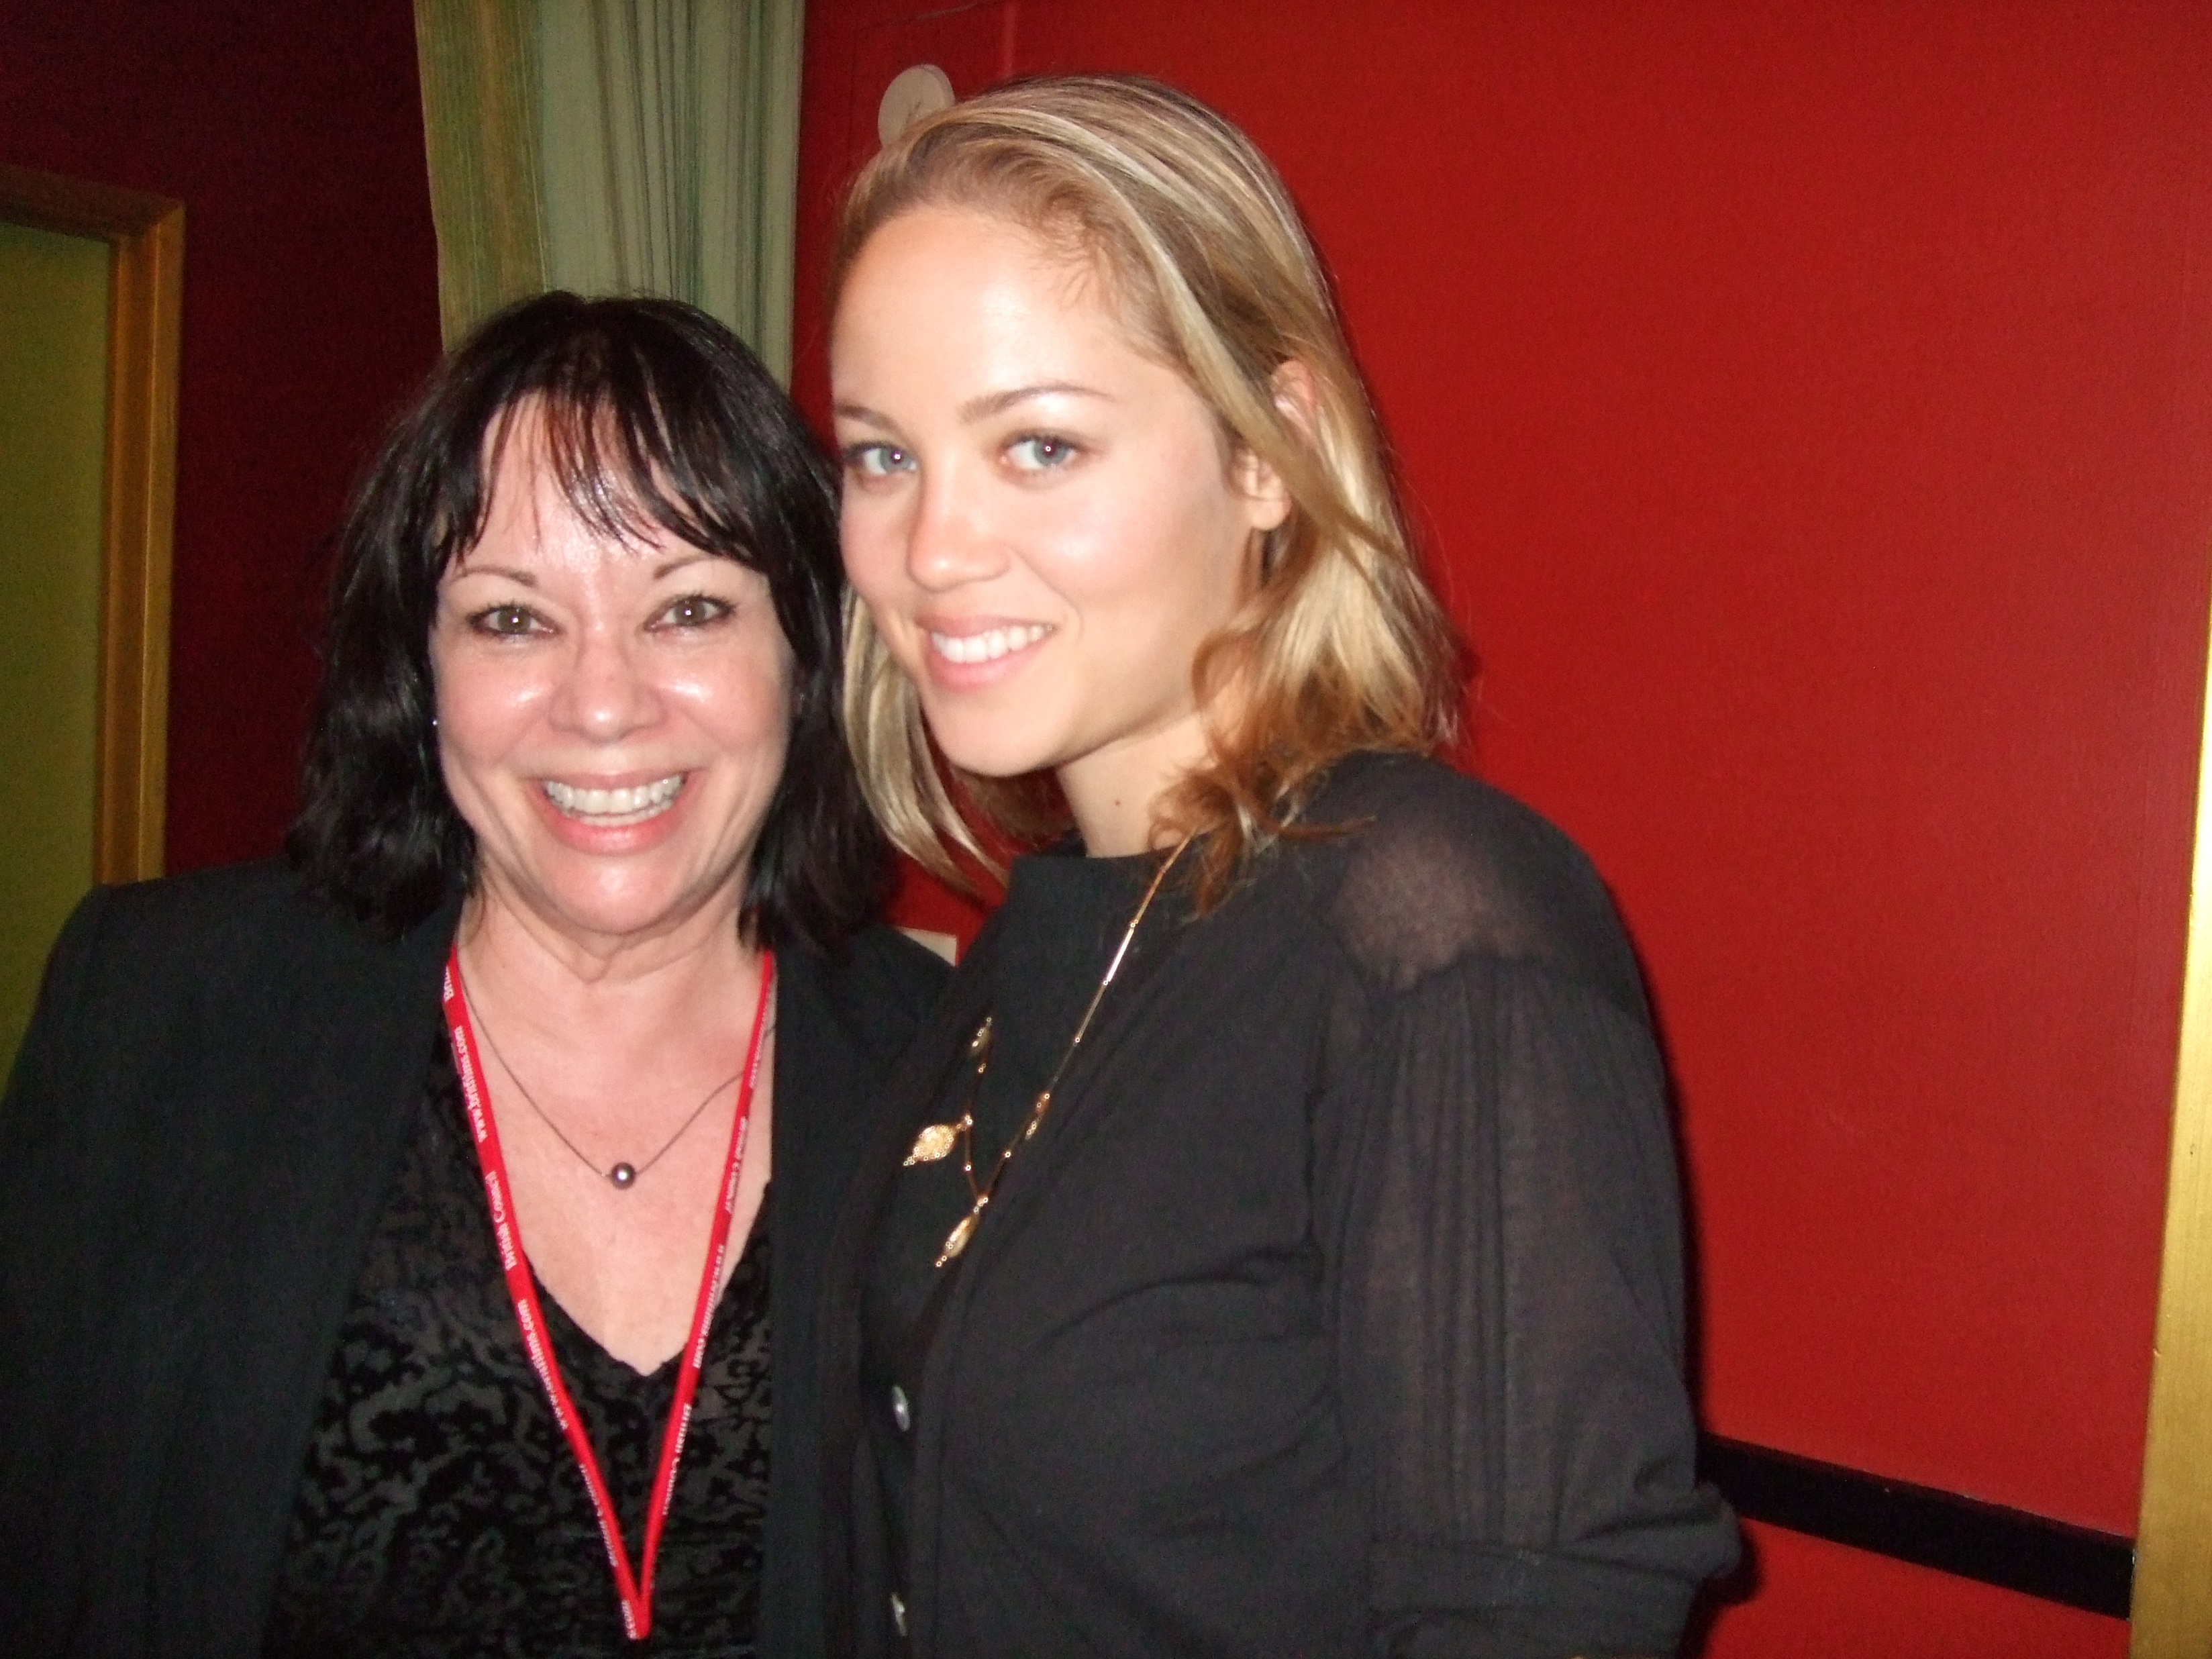 Backstage at awards ceremony for Ojai Film Festival with Erika Christensen, after she presented Craig T. Nelson with the Lifetime Achievement Award for Acting.